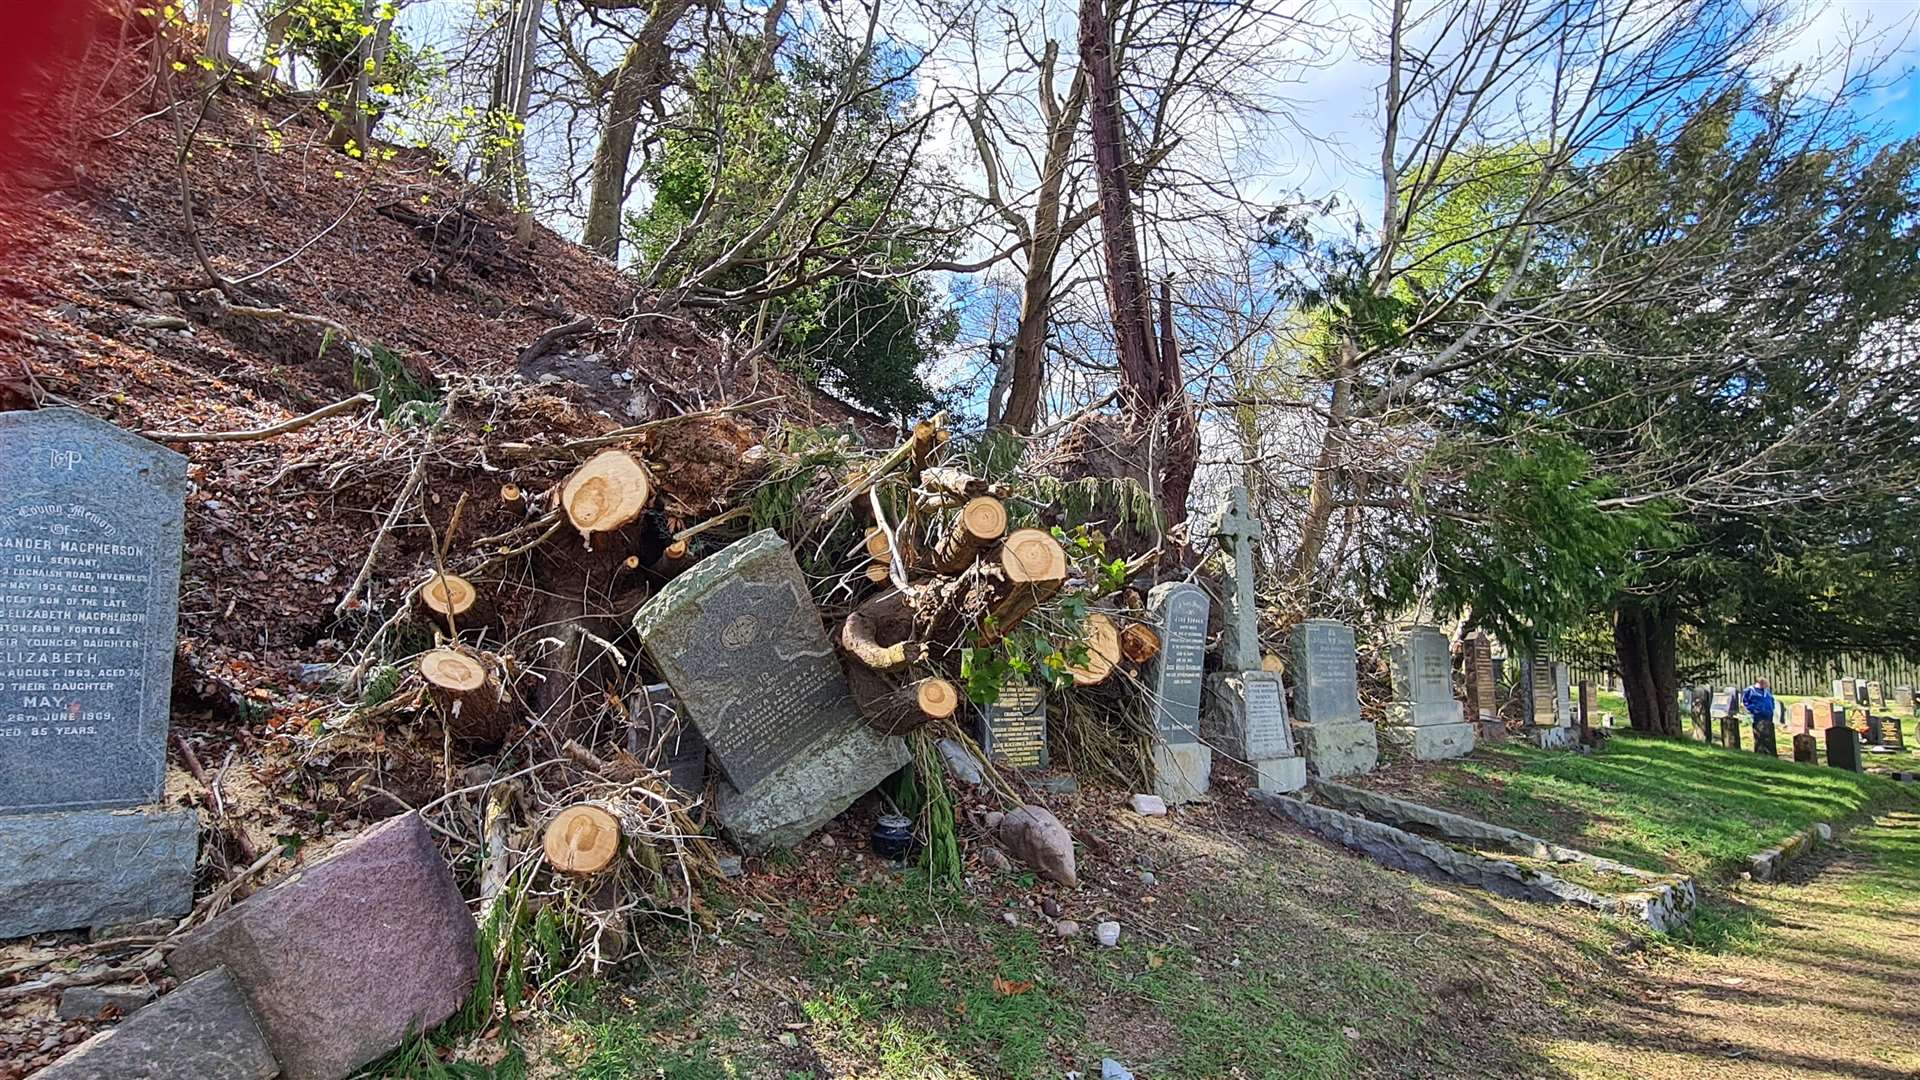 Storm damage in the cemetery.